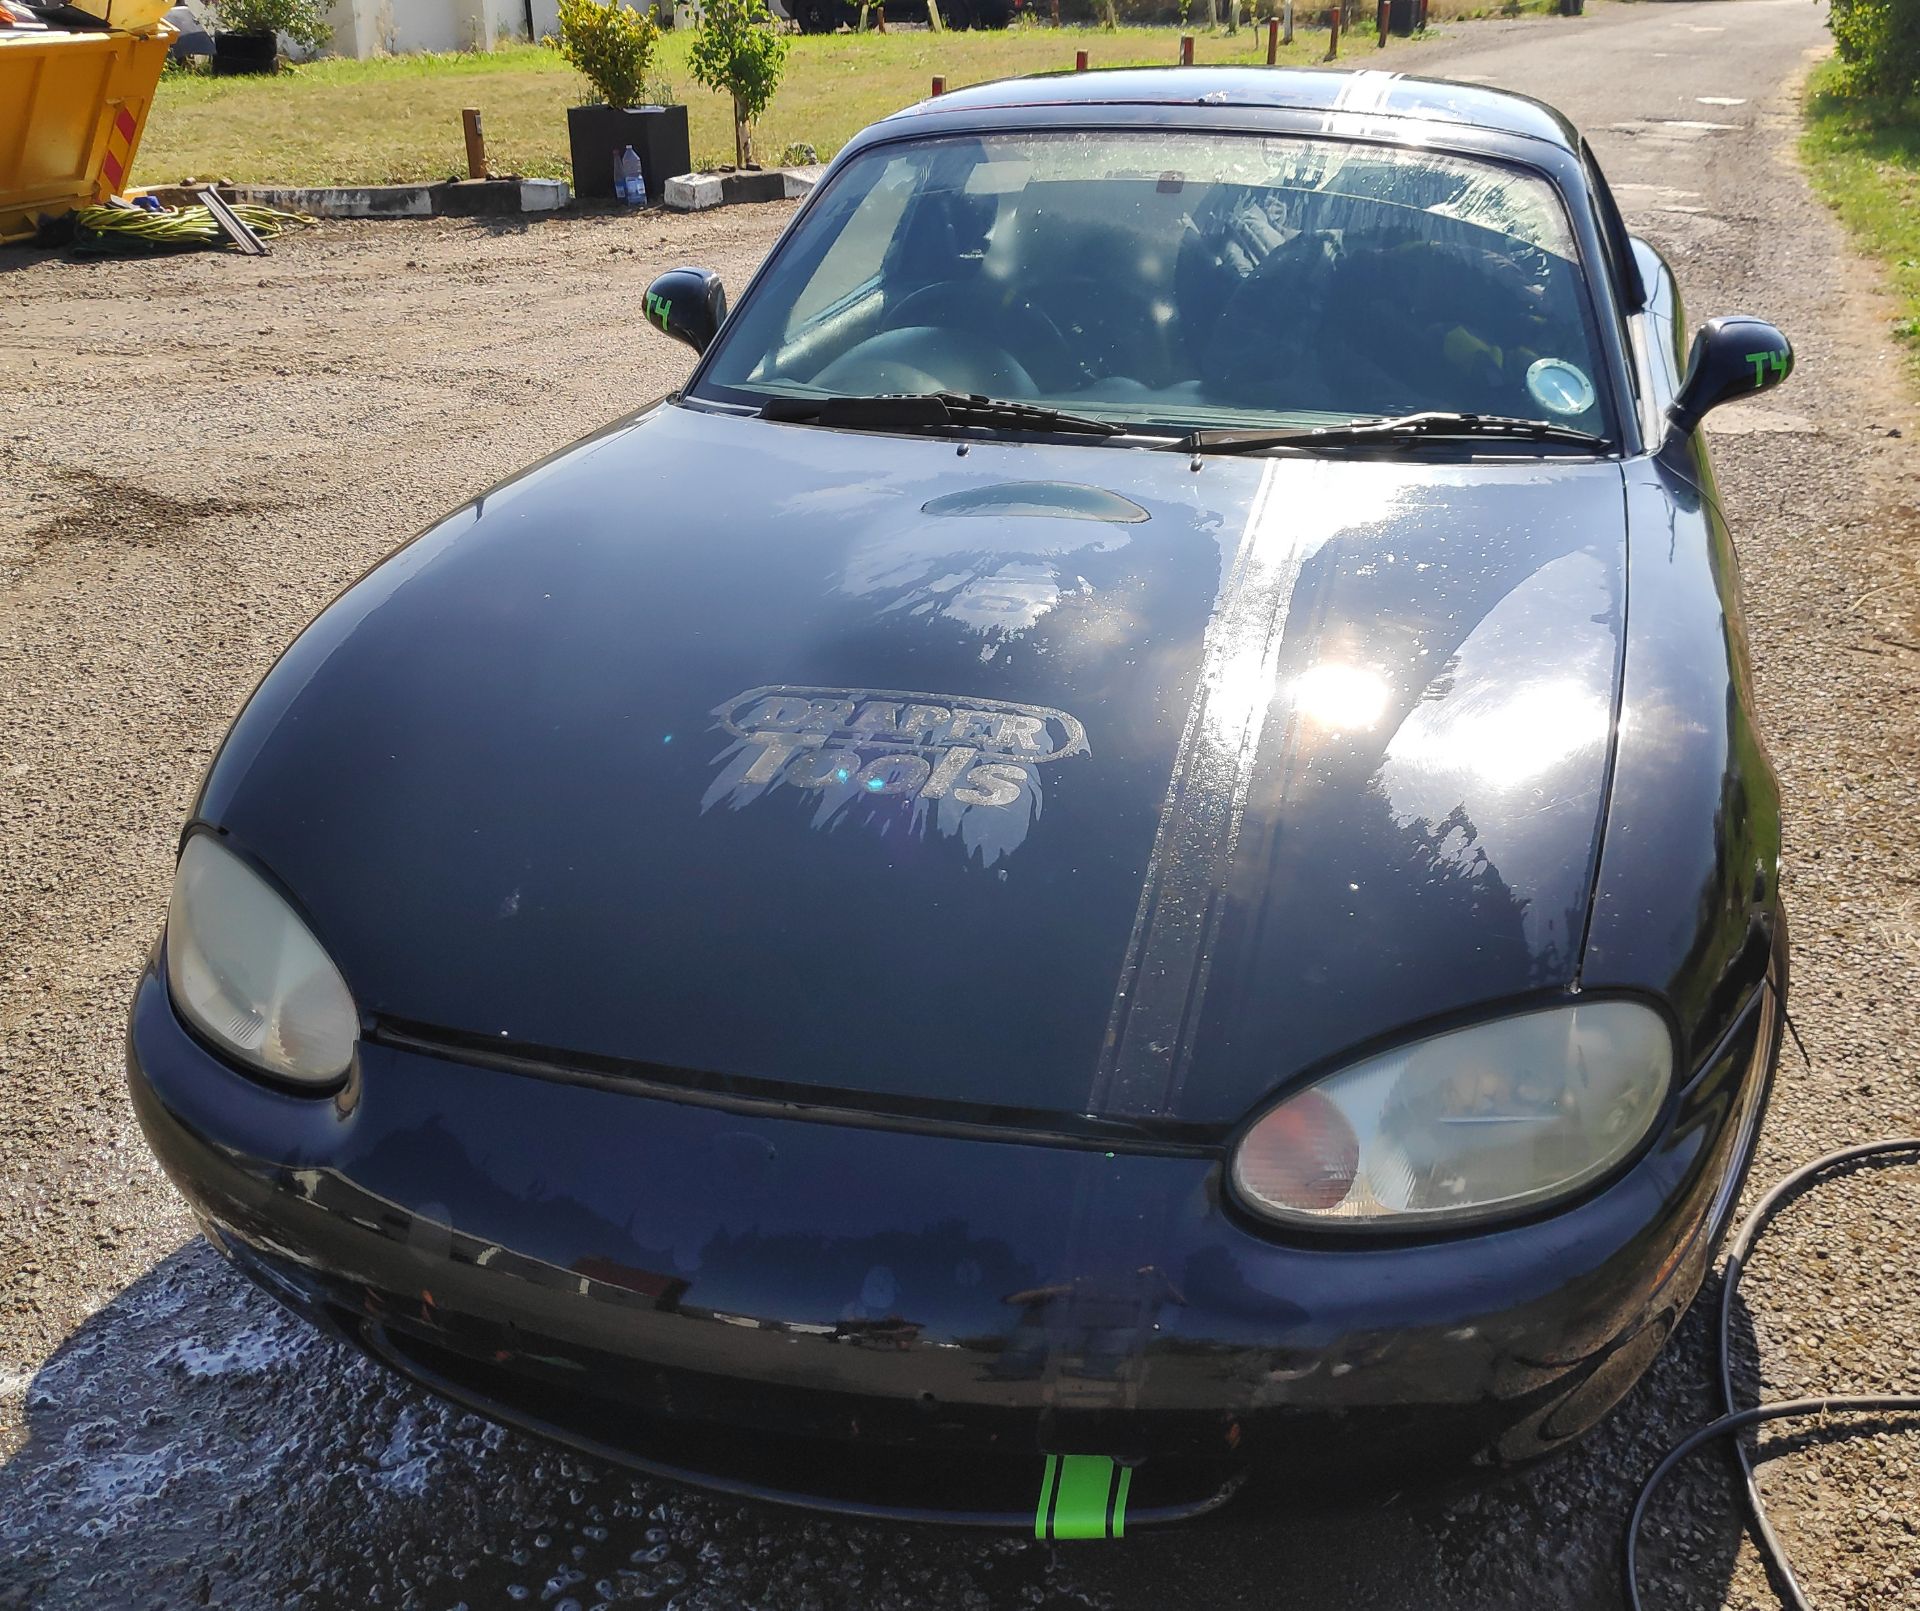 1 x 2000 Mazda MX5 Mk2 Drift Car - Includes 3 Extra Wheels/Tyres - Ref: T4 - CL682 - Location: Bedfo - Image 13 of 77